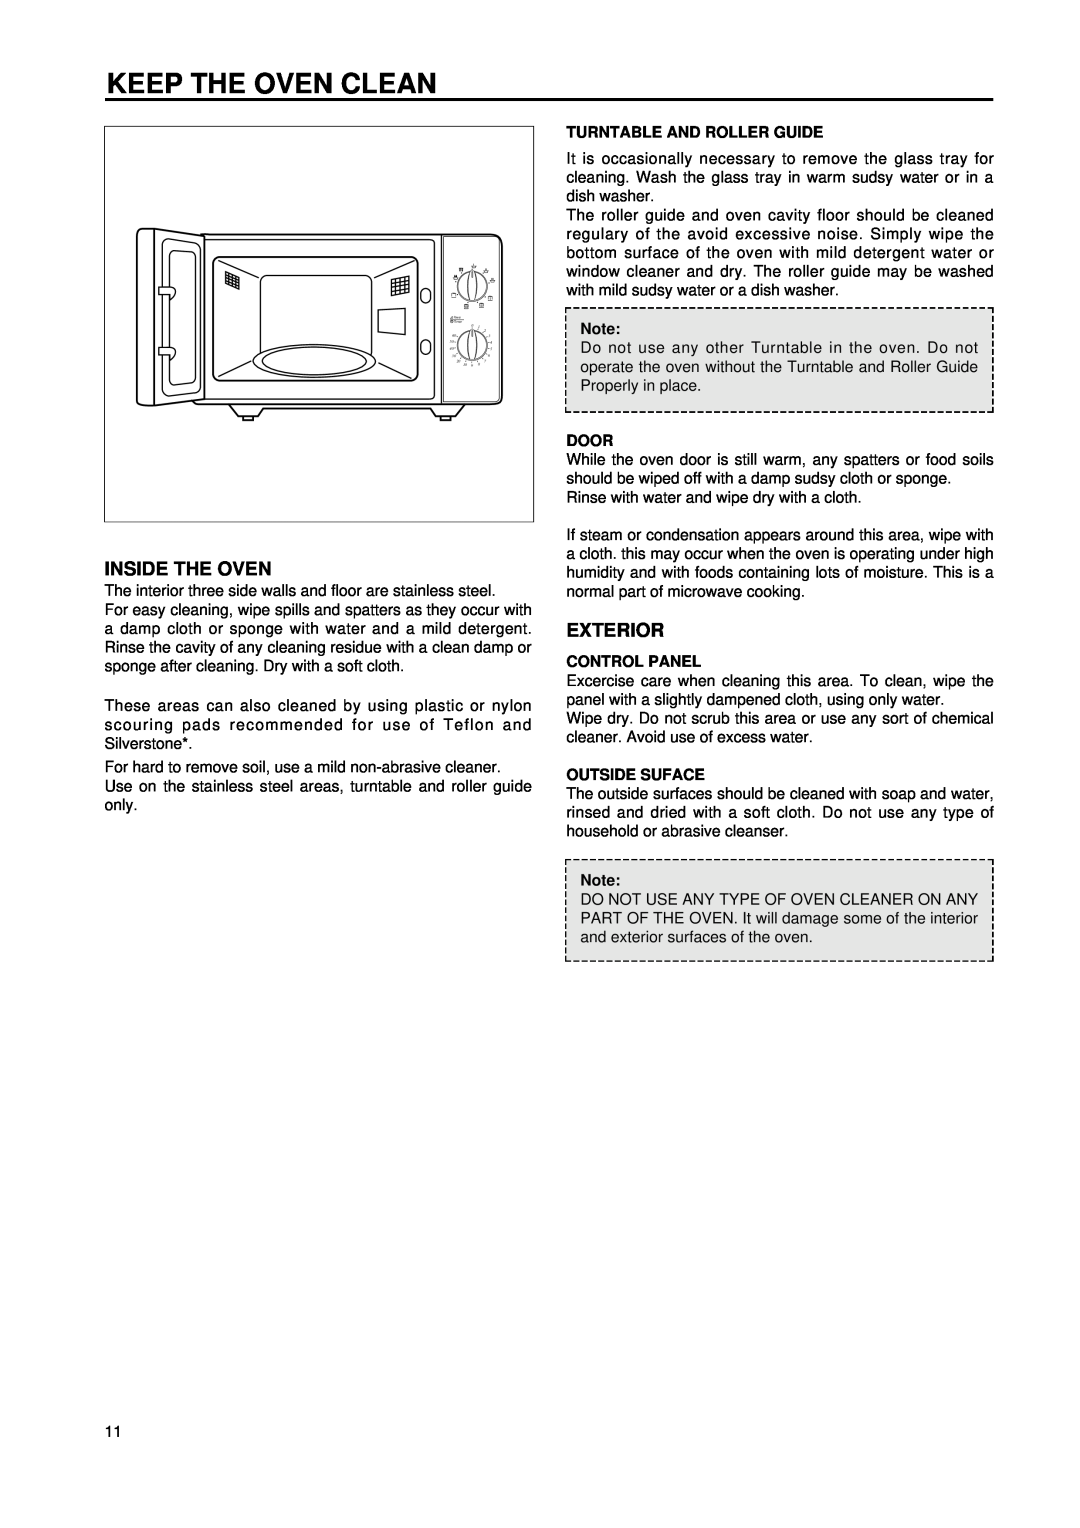 Daewoo KOG-8755 manual Keep The Oven Clean, Inside The Oven, Exterior, Turntable And Roller Guide, Door, Control Panel 